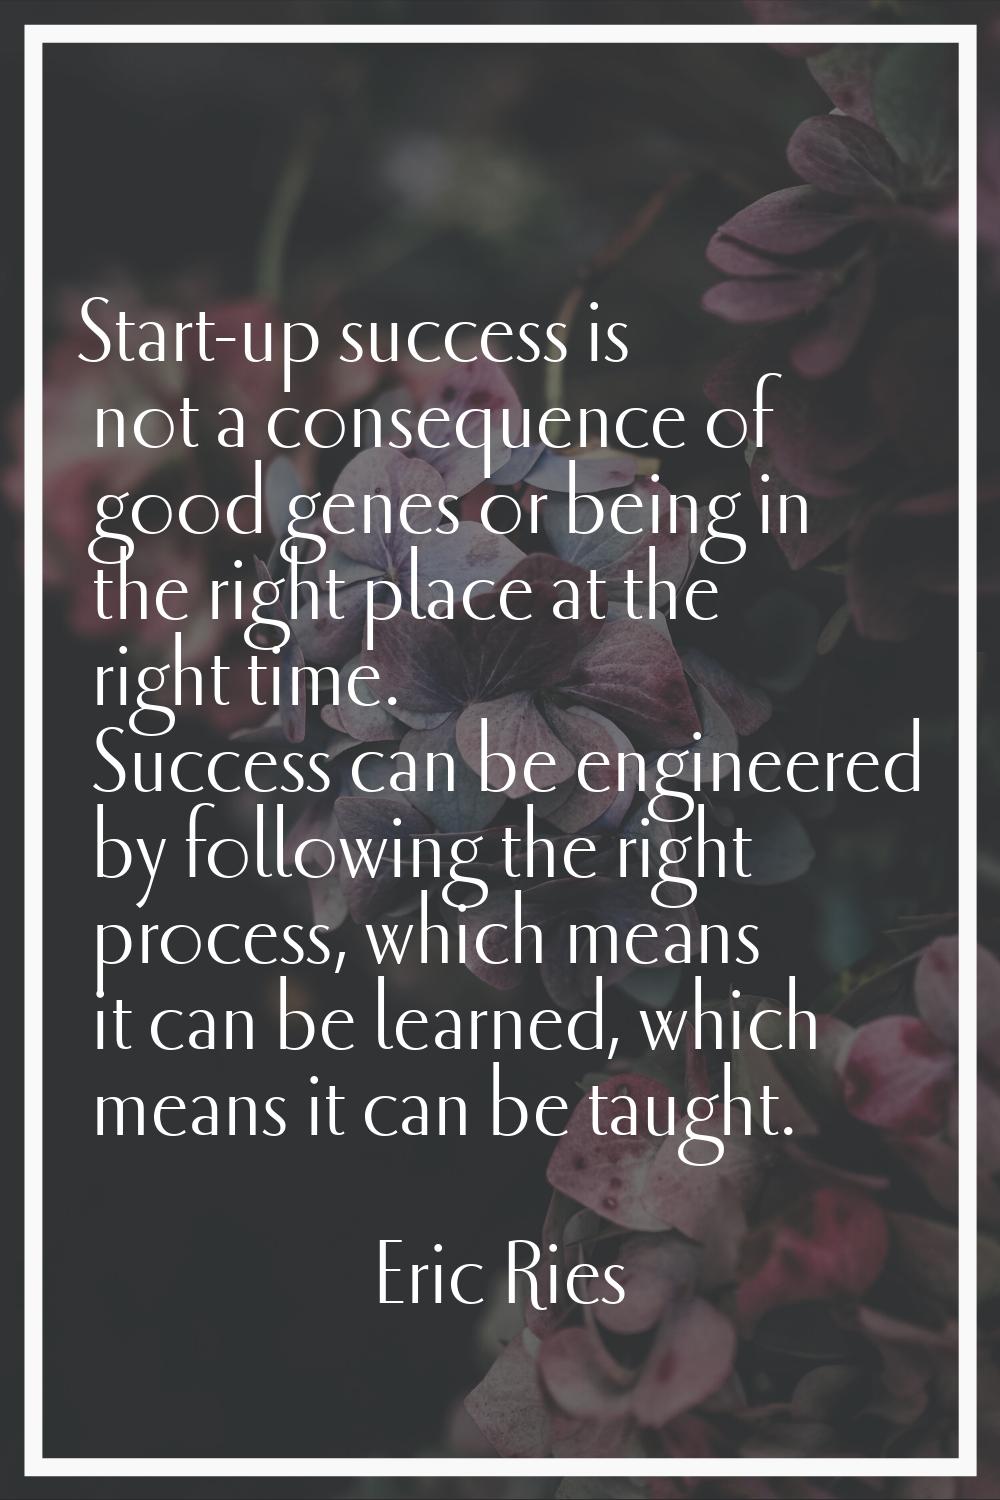 Start-up success is not a consequence of good genes or being in the right place at the right time. 